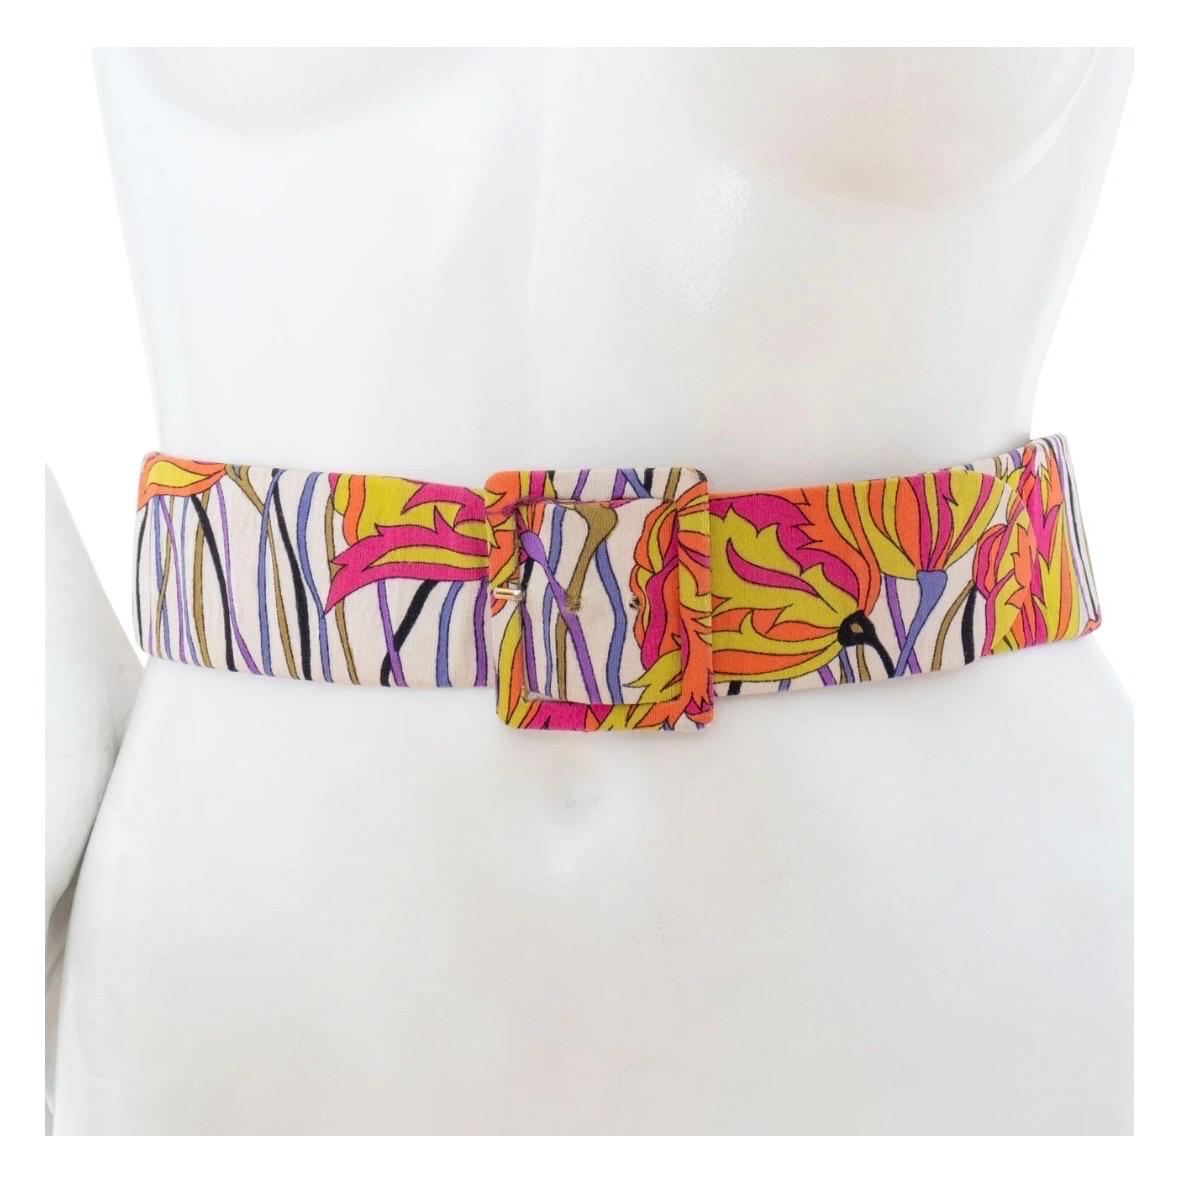 Vintage floral print belt by Pucci
Fabric covered hardware
Abstract floral print
Leather underside
Rectangle buckle
Wide shape
Condition: good preowned; some signs of wear throughout, minor display of leather cracking; fully wearable